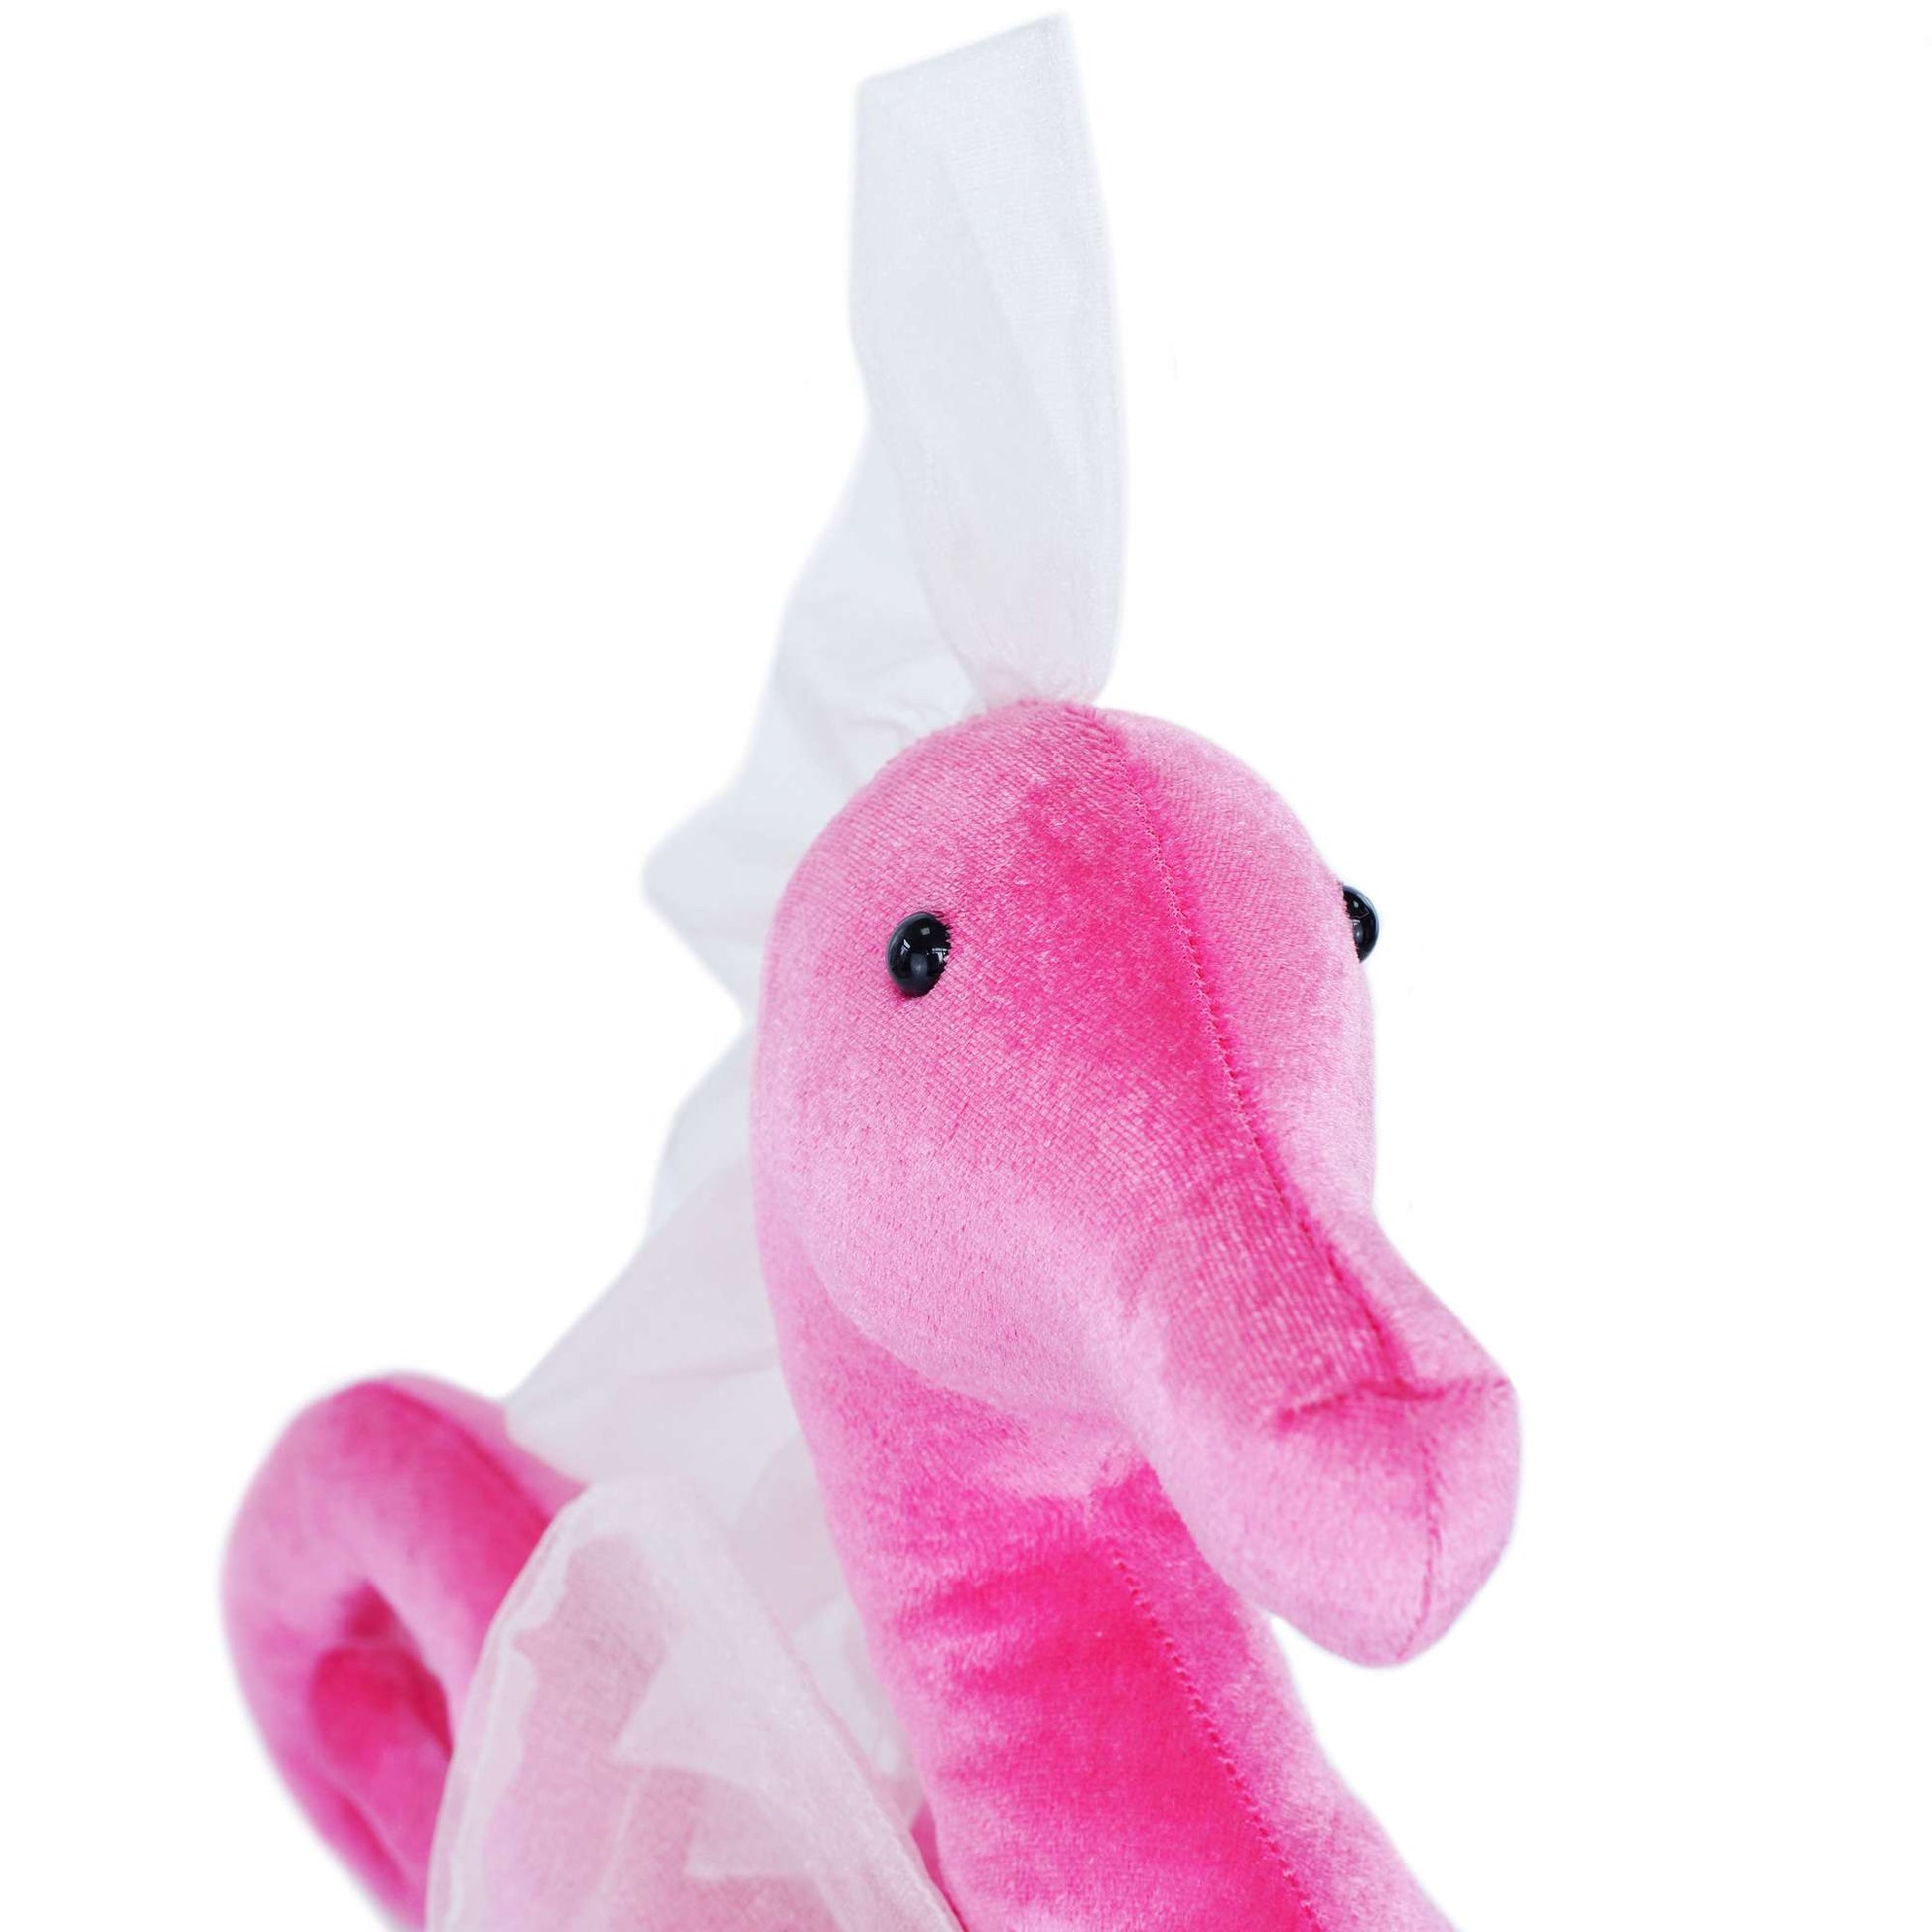 Pink seahorse head close up stuffed animal PlushThis